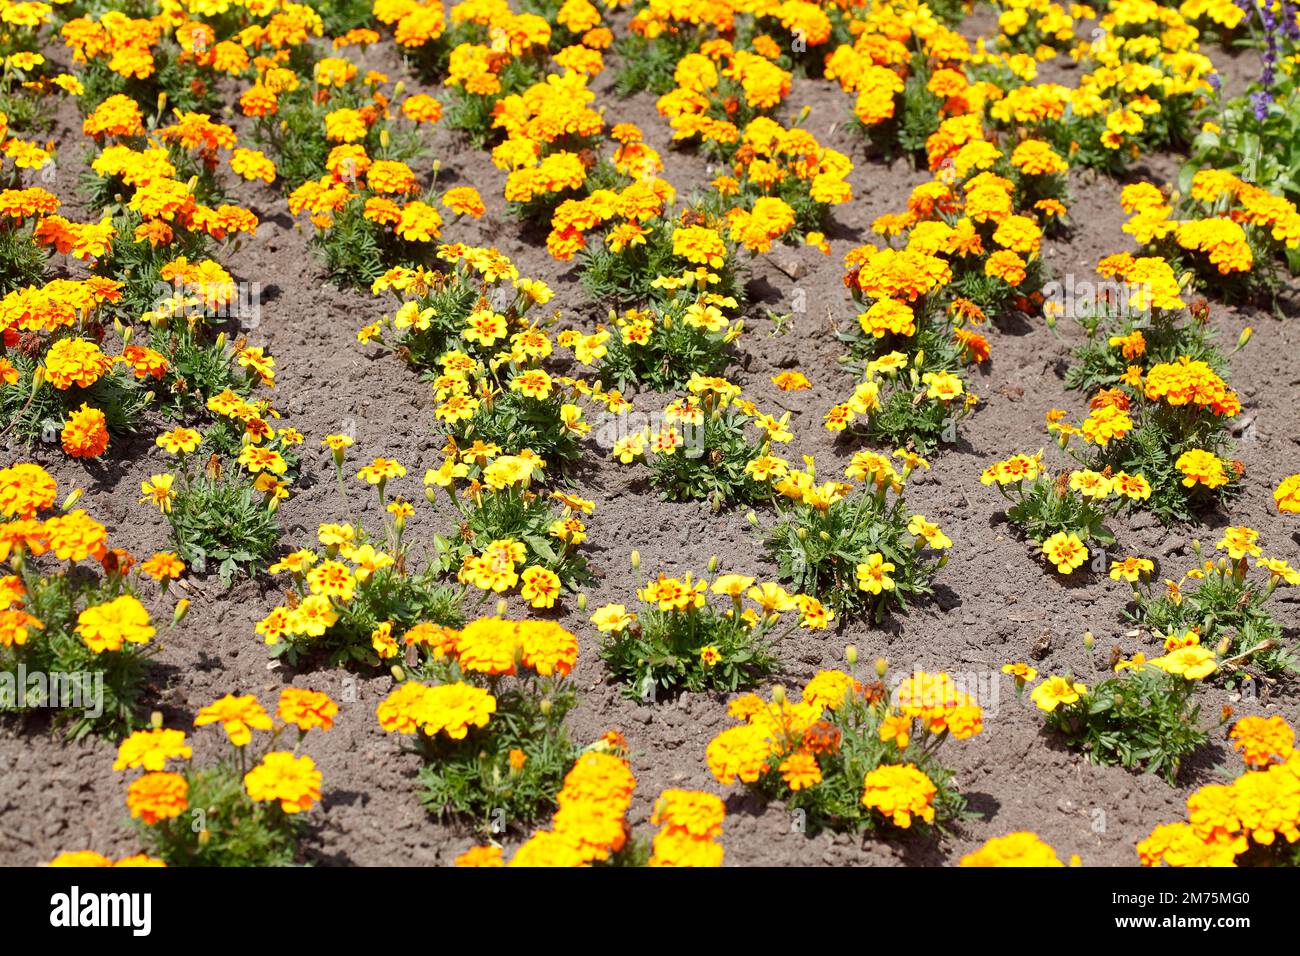 Yellow marigolds on a flower bed, Germany Stock Photo